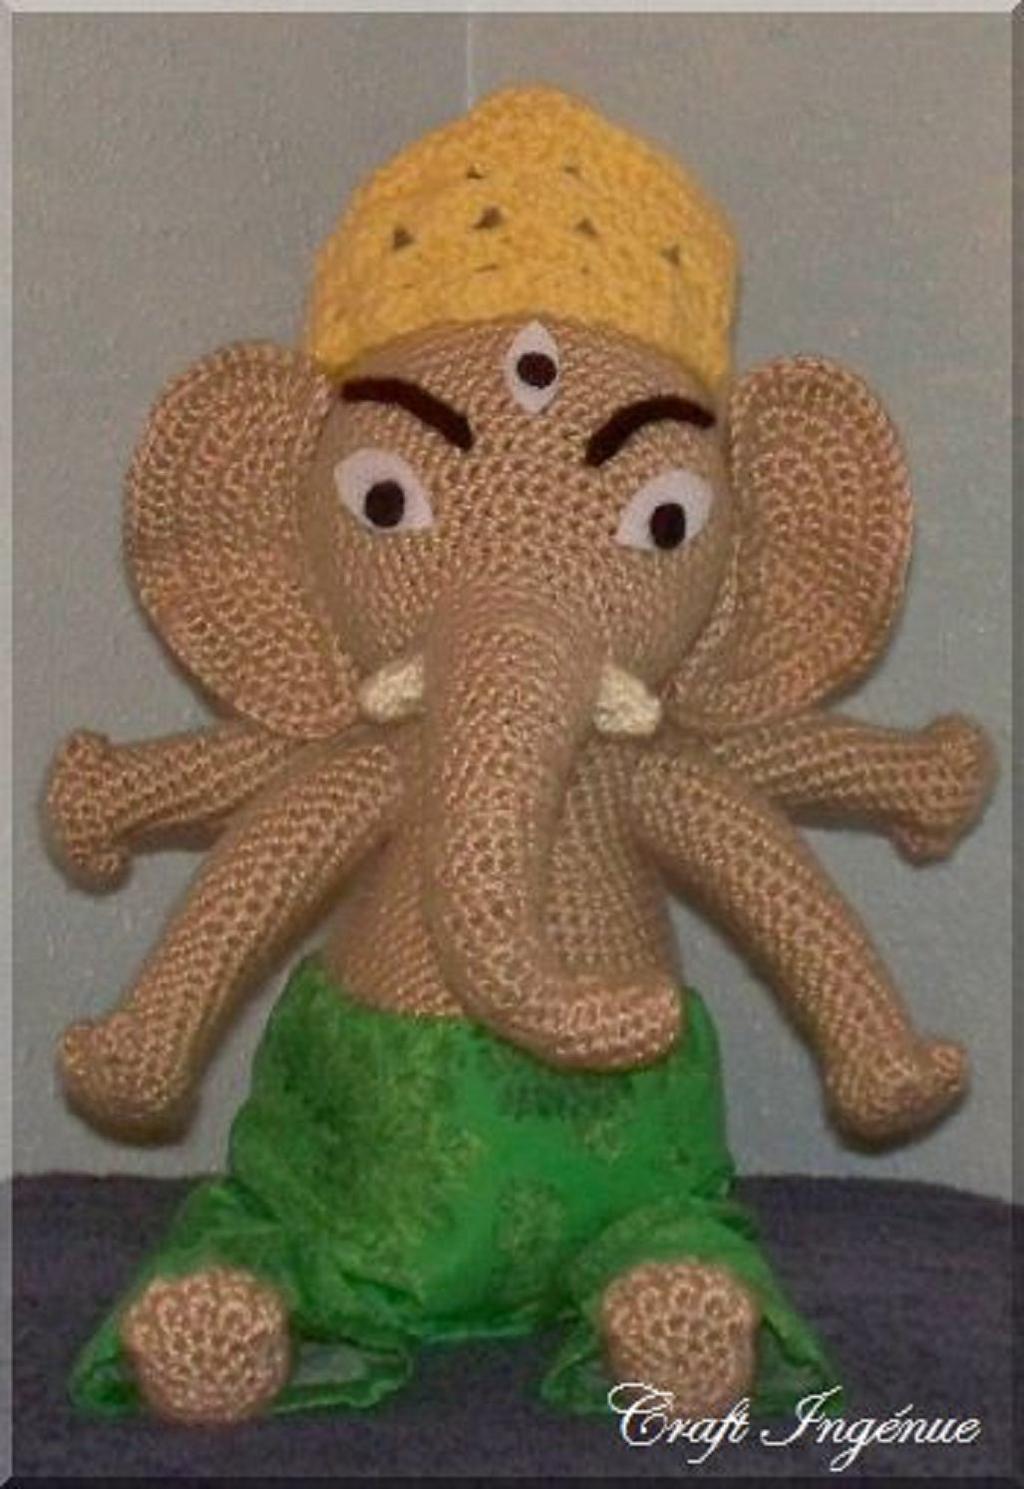 Bengali Babees Ganesh When crocheted with yarn and hook specified, Ganesh measures 14 inches L, 13 inches around the belly, and a sitting height of 10 inches.